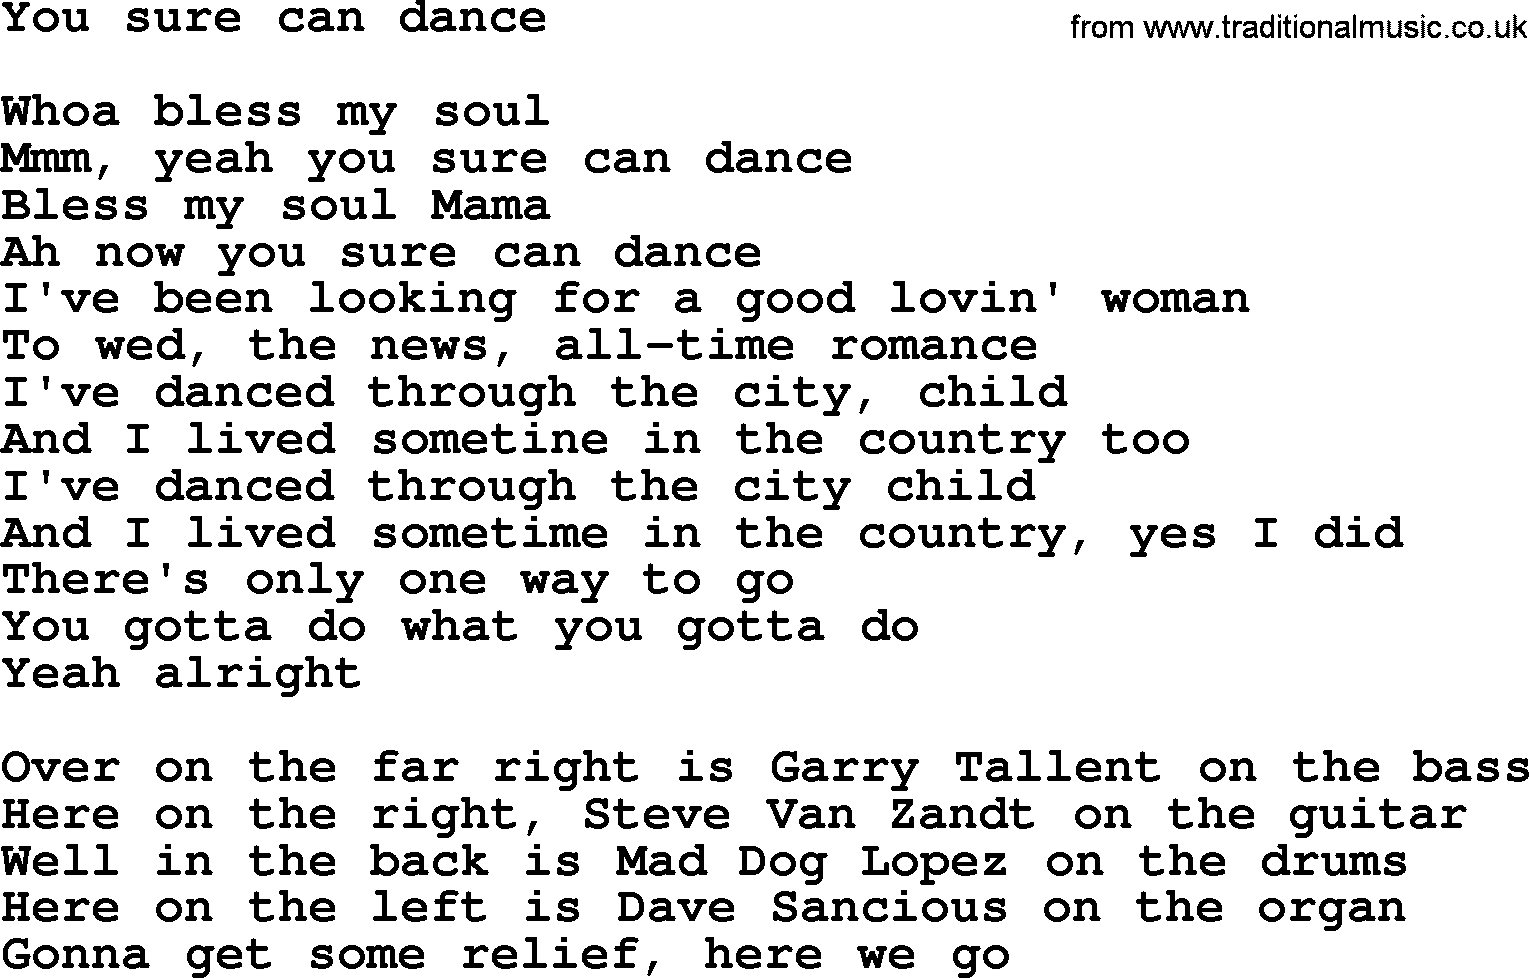 Bruce Springsteen song: You Sure Can Dance lyrics